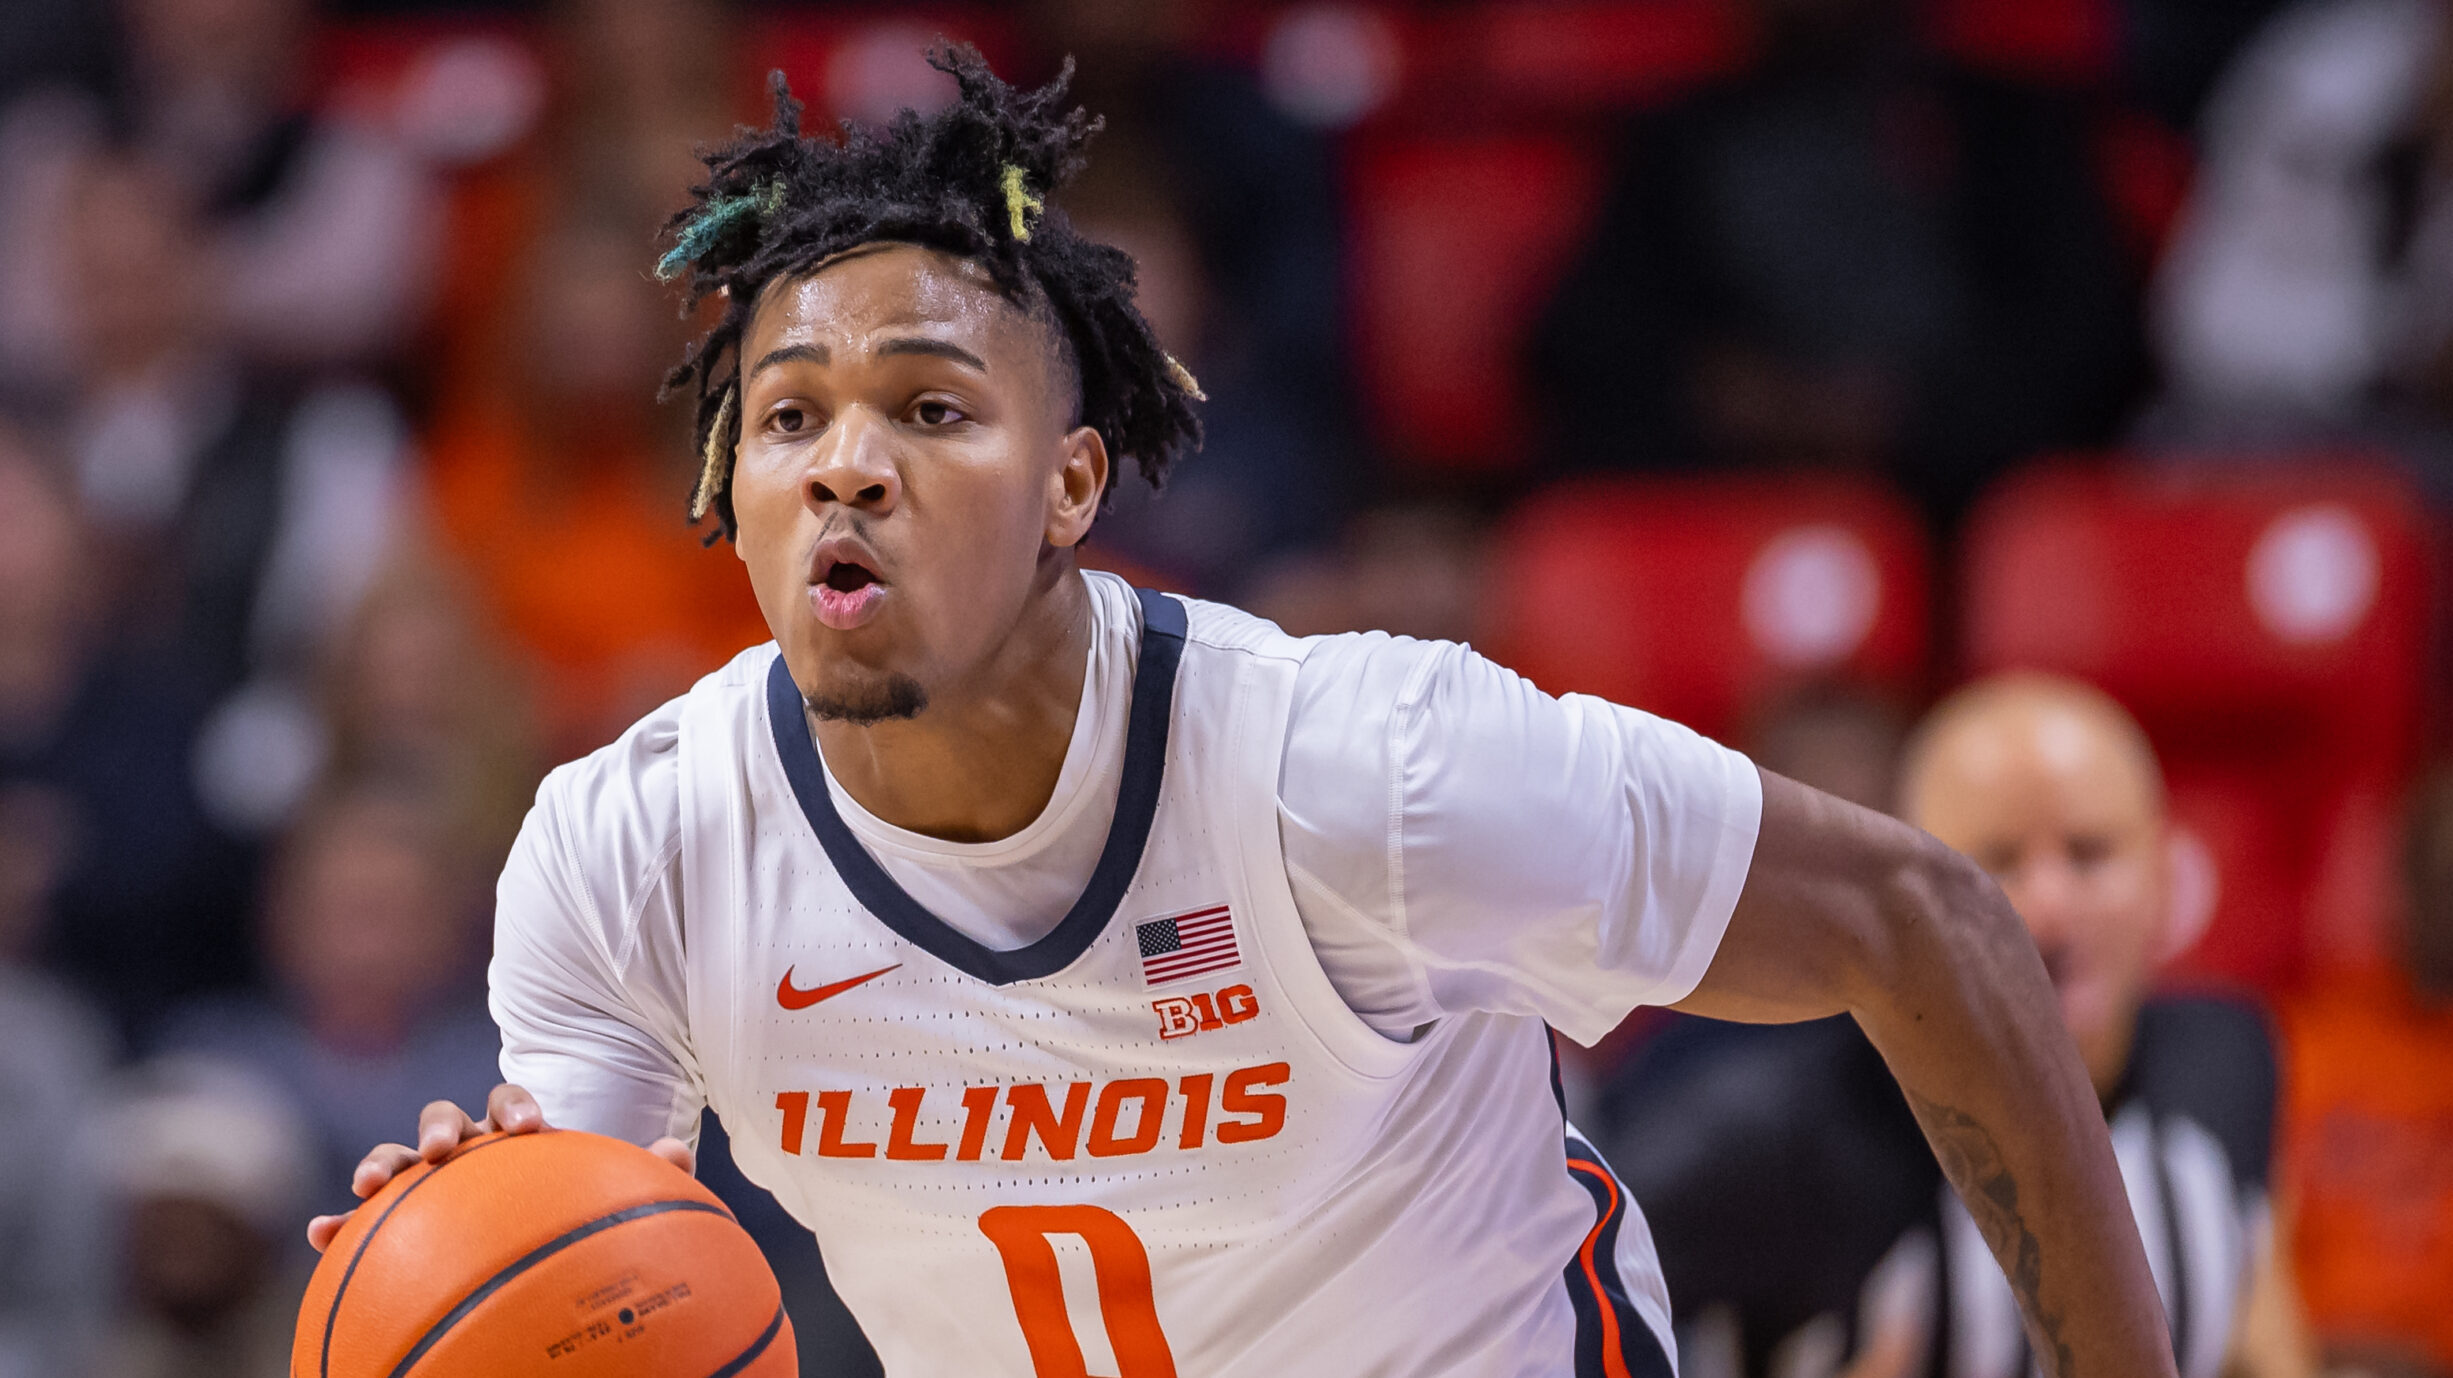 Illinois suspends star basketball player Terrence Shannon Jr. following